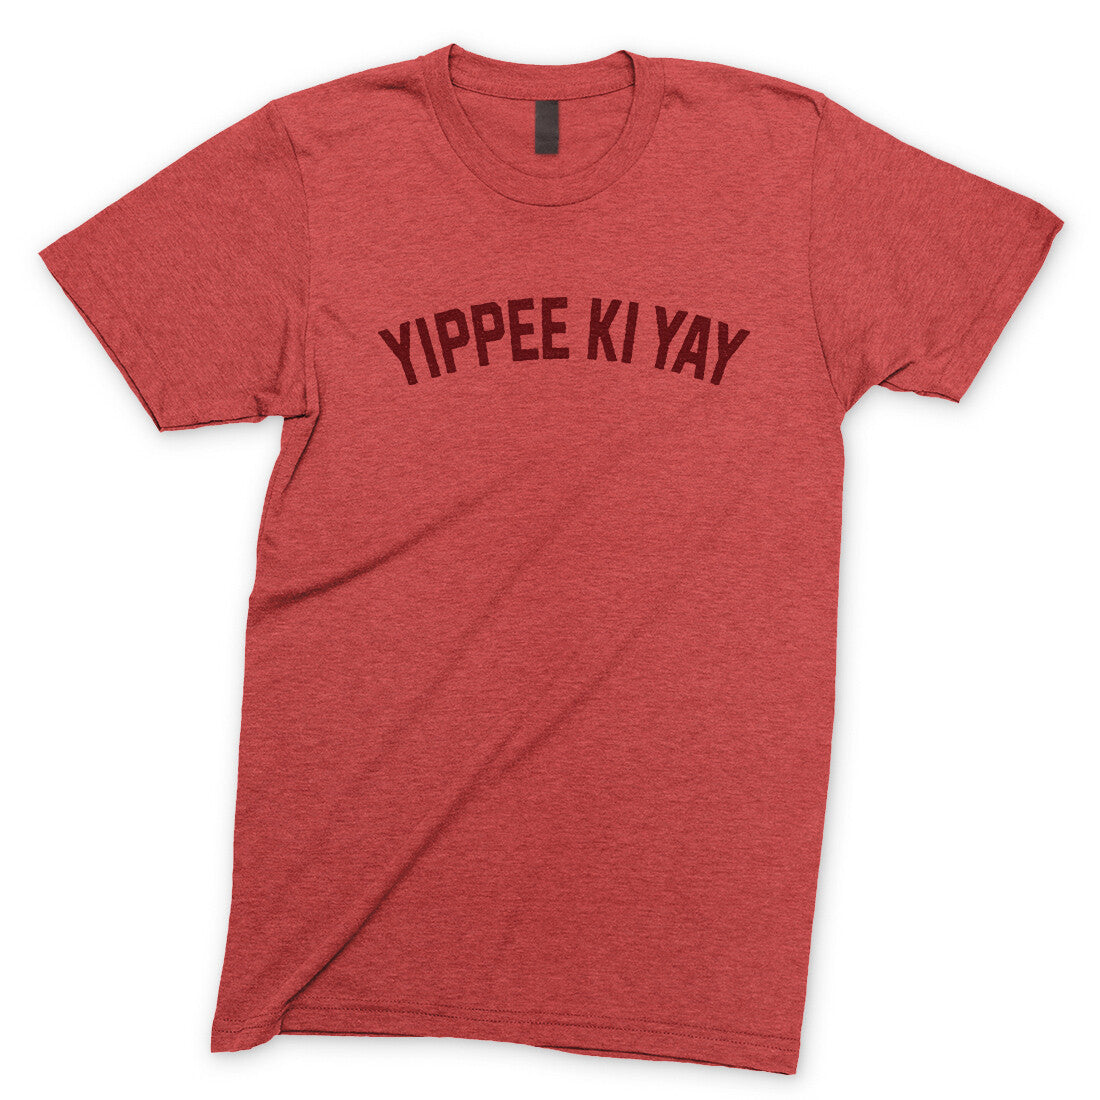 Yippee Ki Yay in Heather Red Color